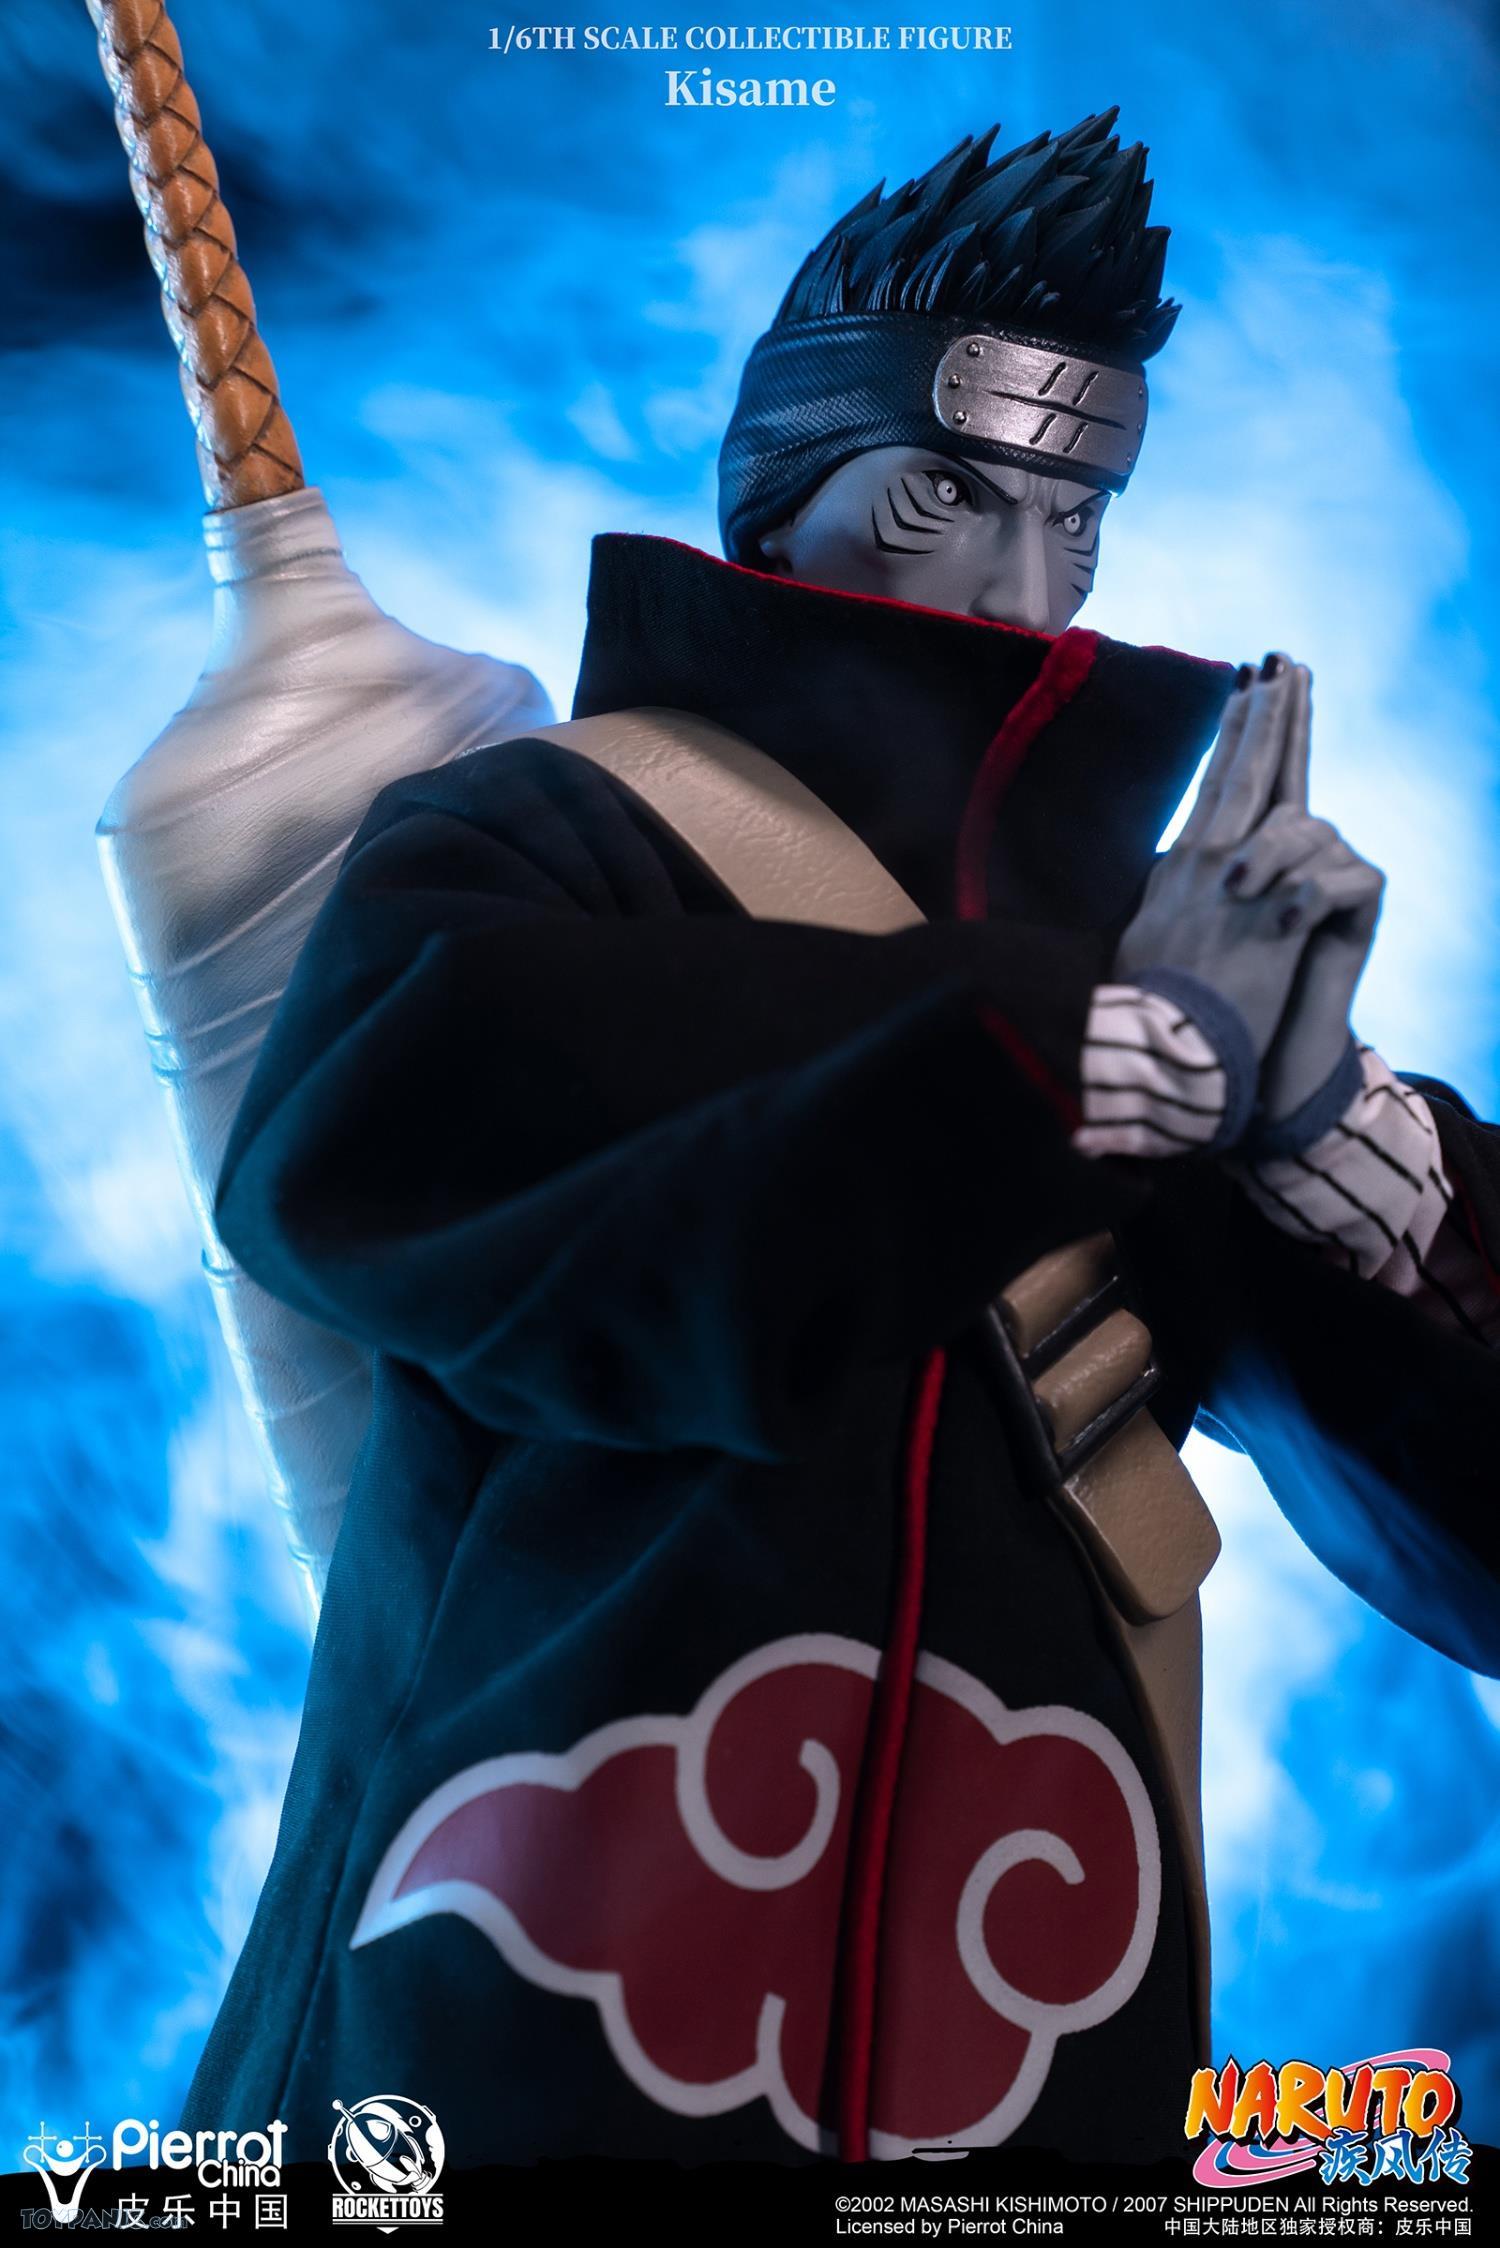 Male - NEW PRODUCT: Rocket Toys ROC-007 1/6 Scale Kisame 221202460438PM_9720868